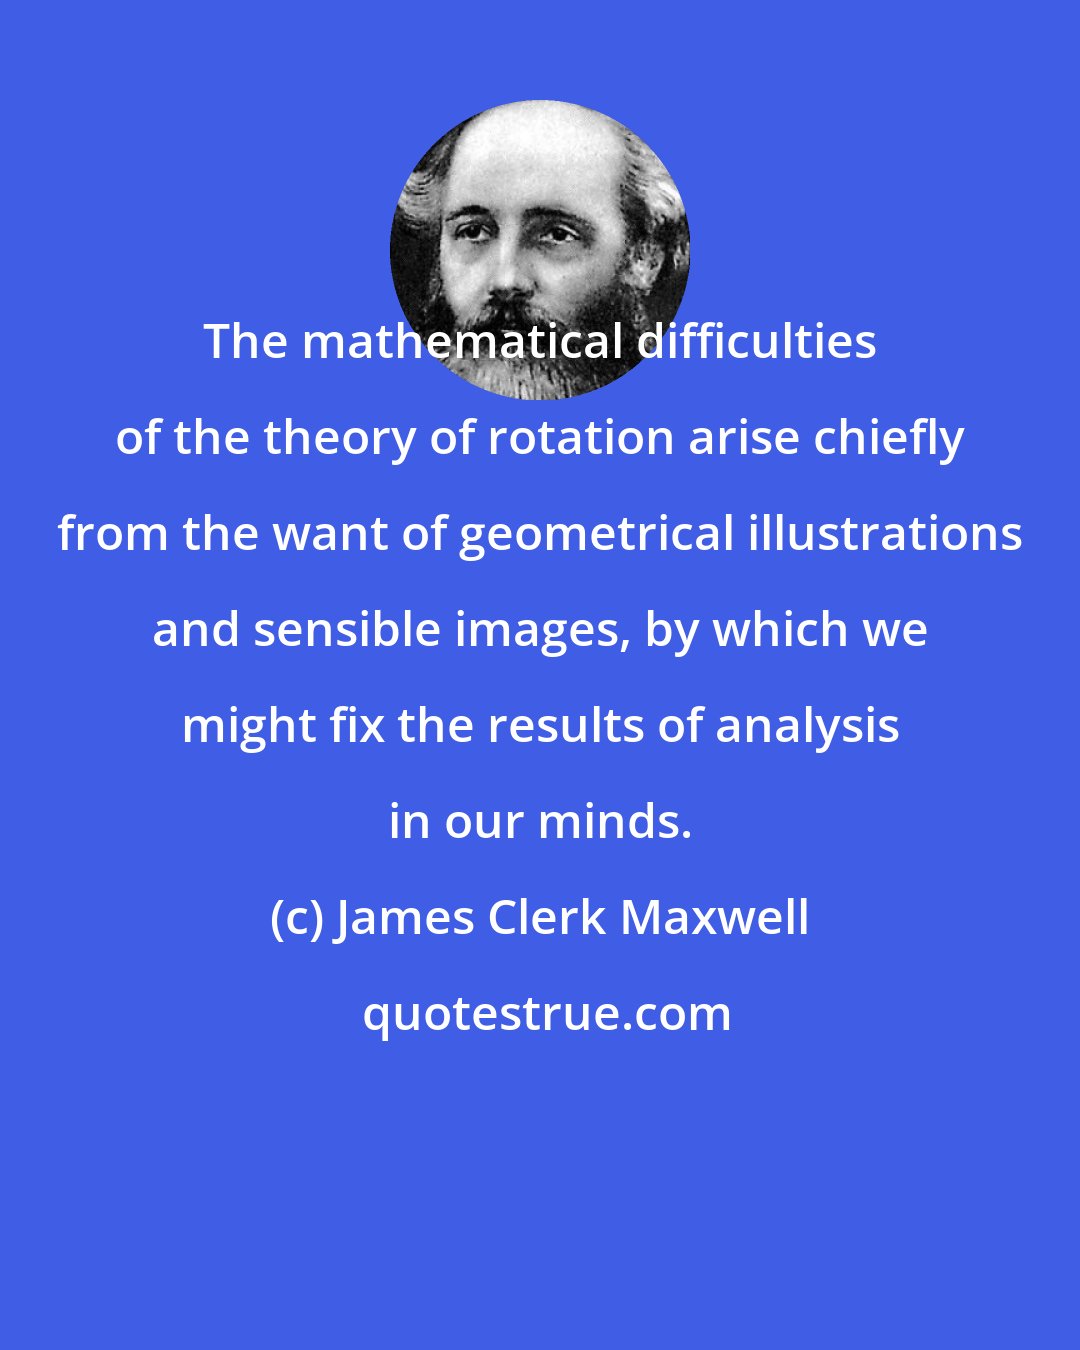 James Clerk Maxwell: The mathematical difficulties of the theory of rotation arise chiefly from the want of geometrical illustrations and sensible images, by which we might fix the results of analysis in our minds.